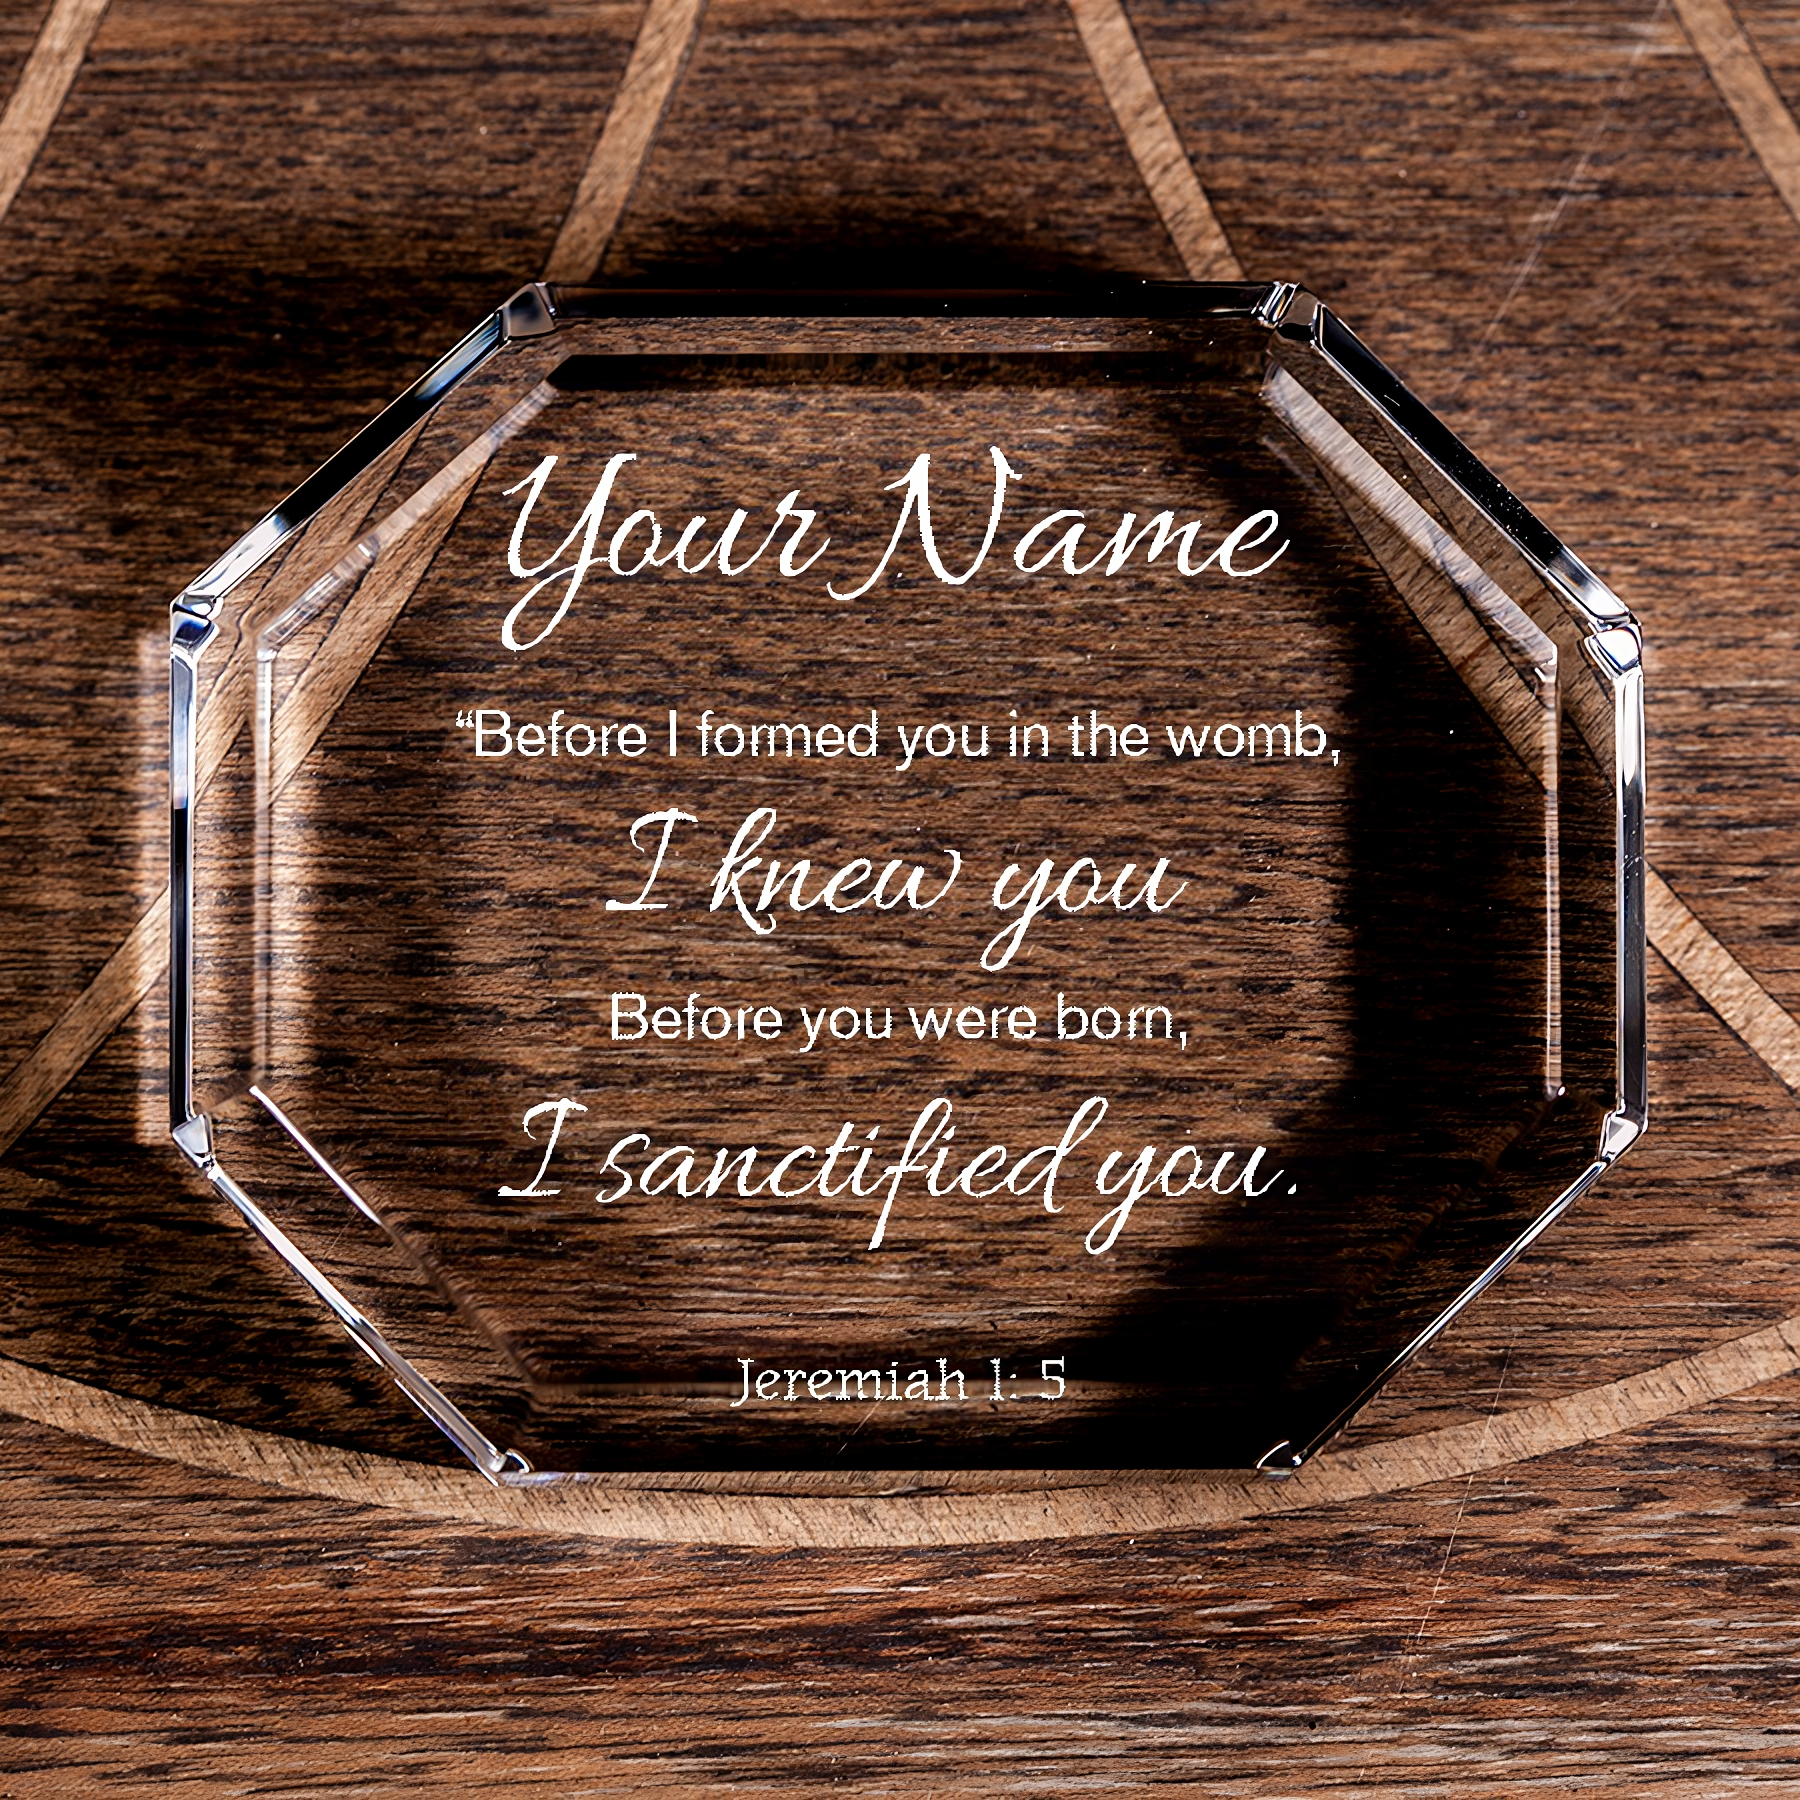 Jeremiah 1:5 I Sanctified You Octagonal Paperweight Personalized Christian Gift-Express Your Love Gifts